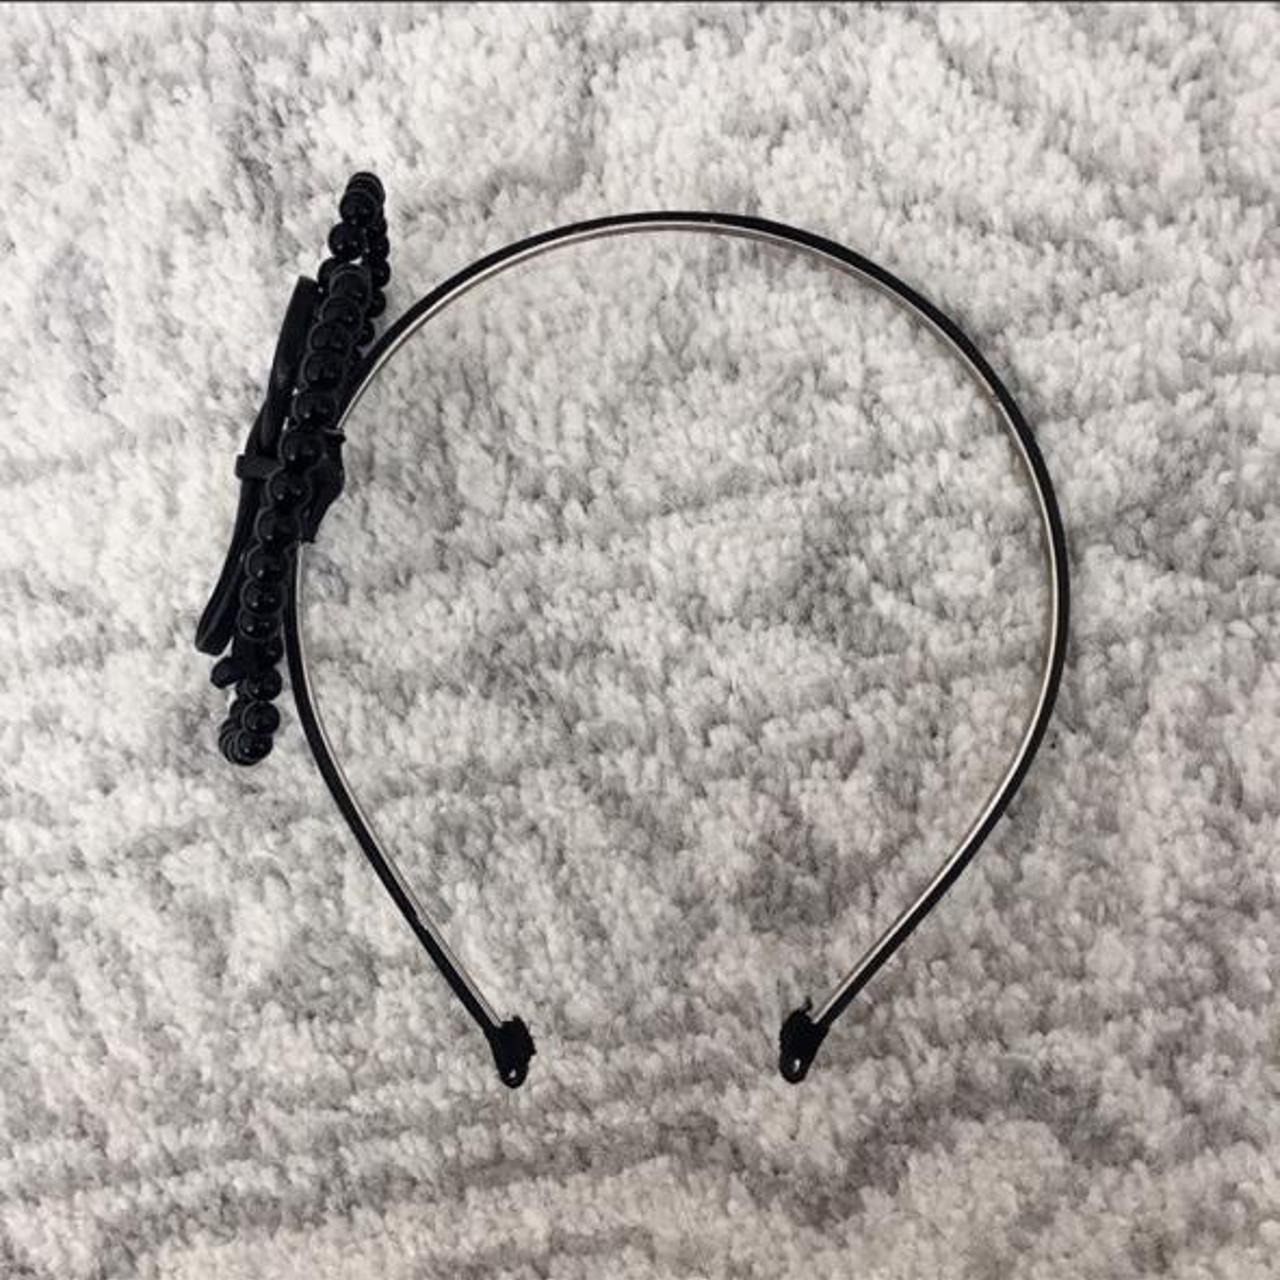 Product Image 2 - Urban outfitters headband
Worn once in